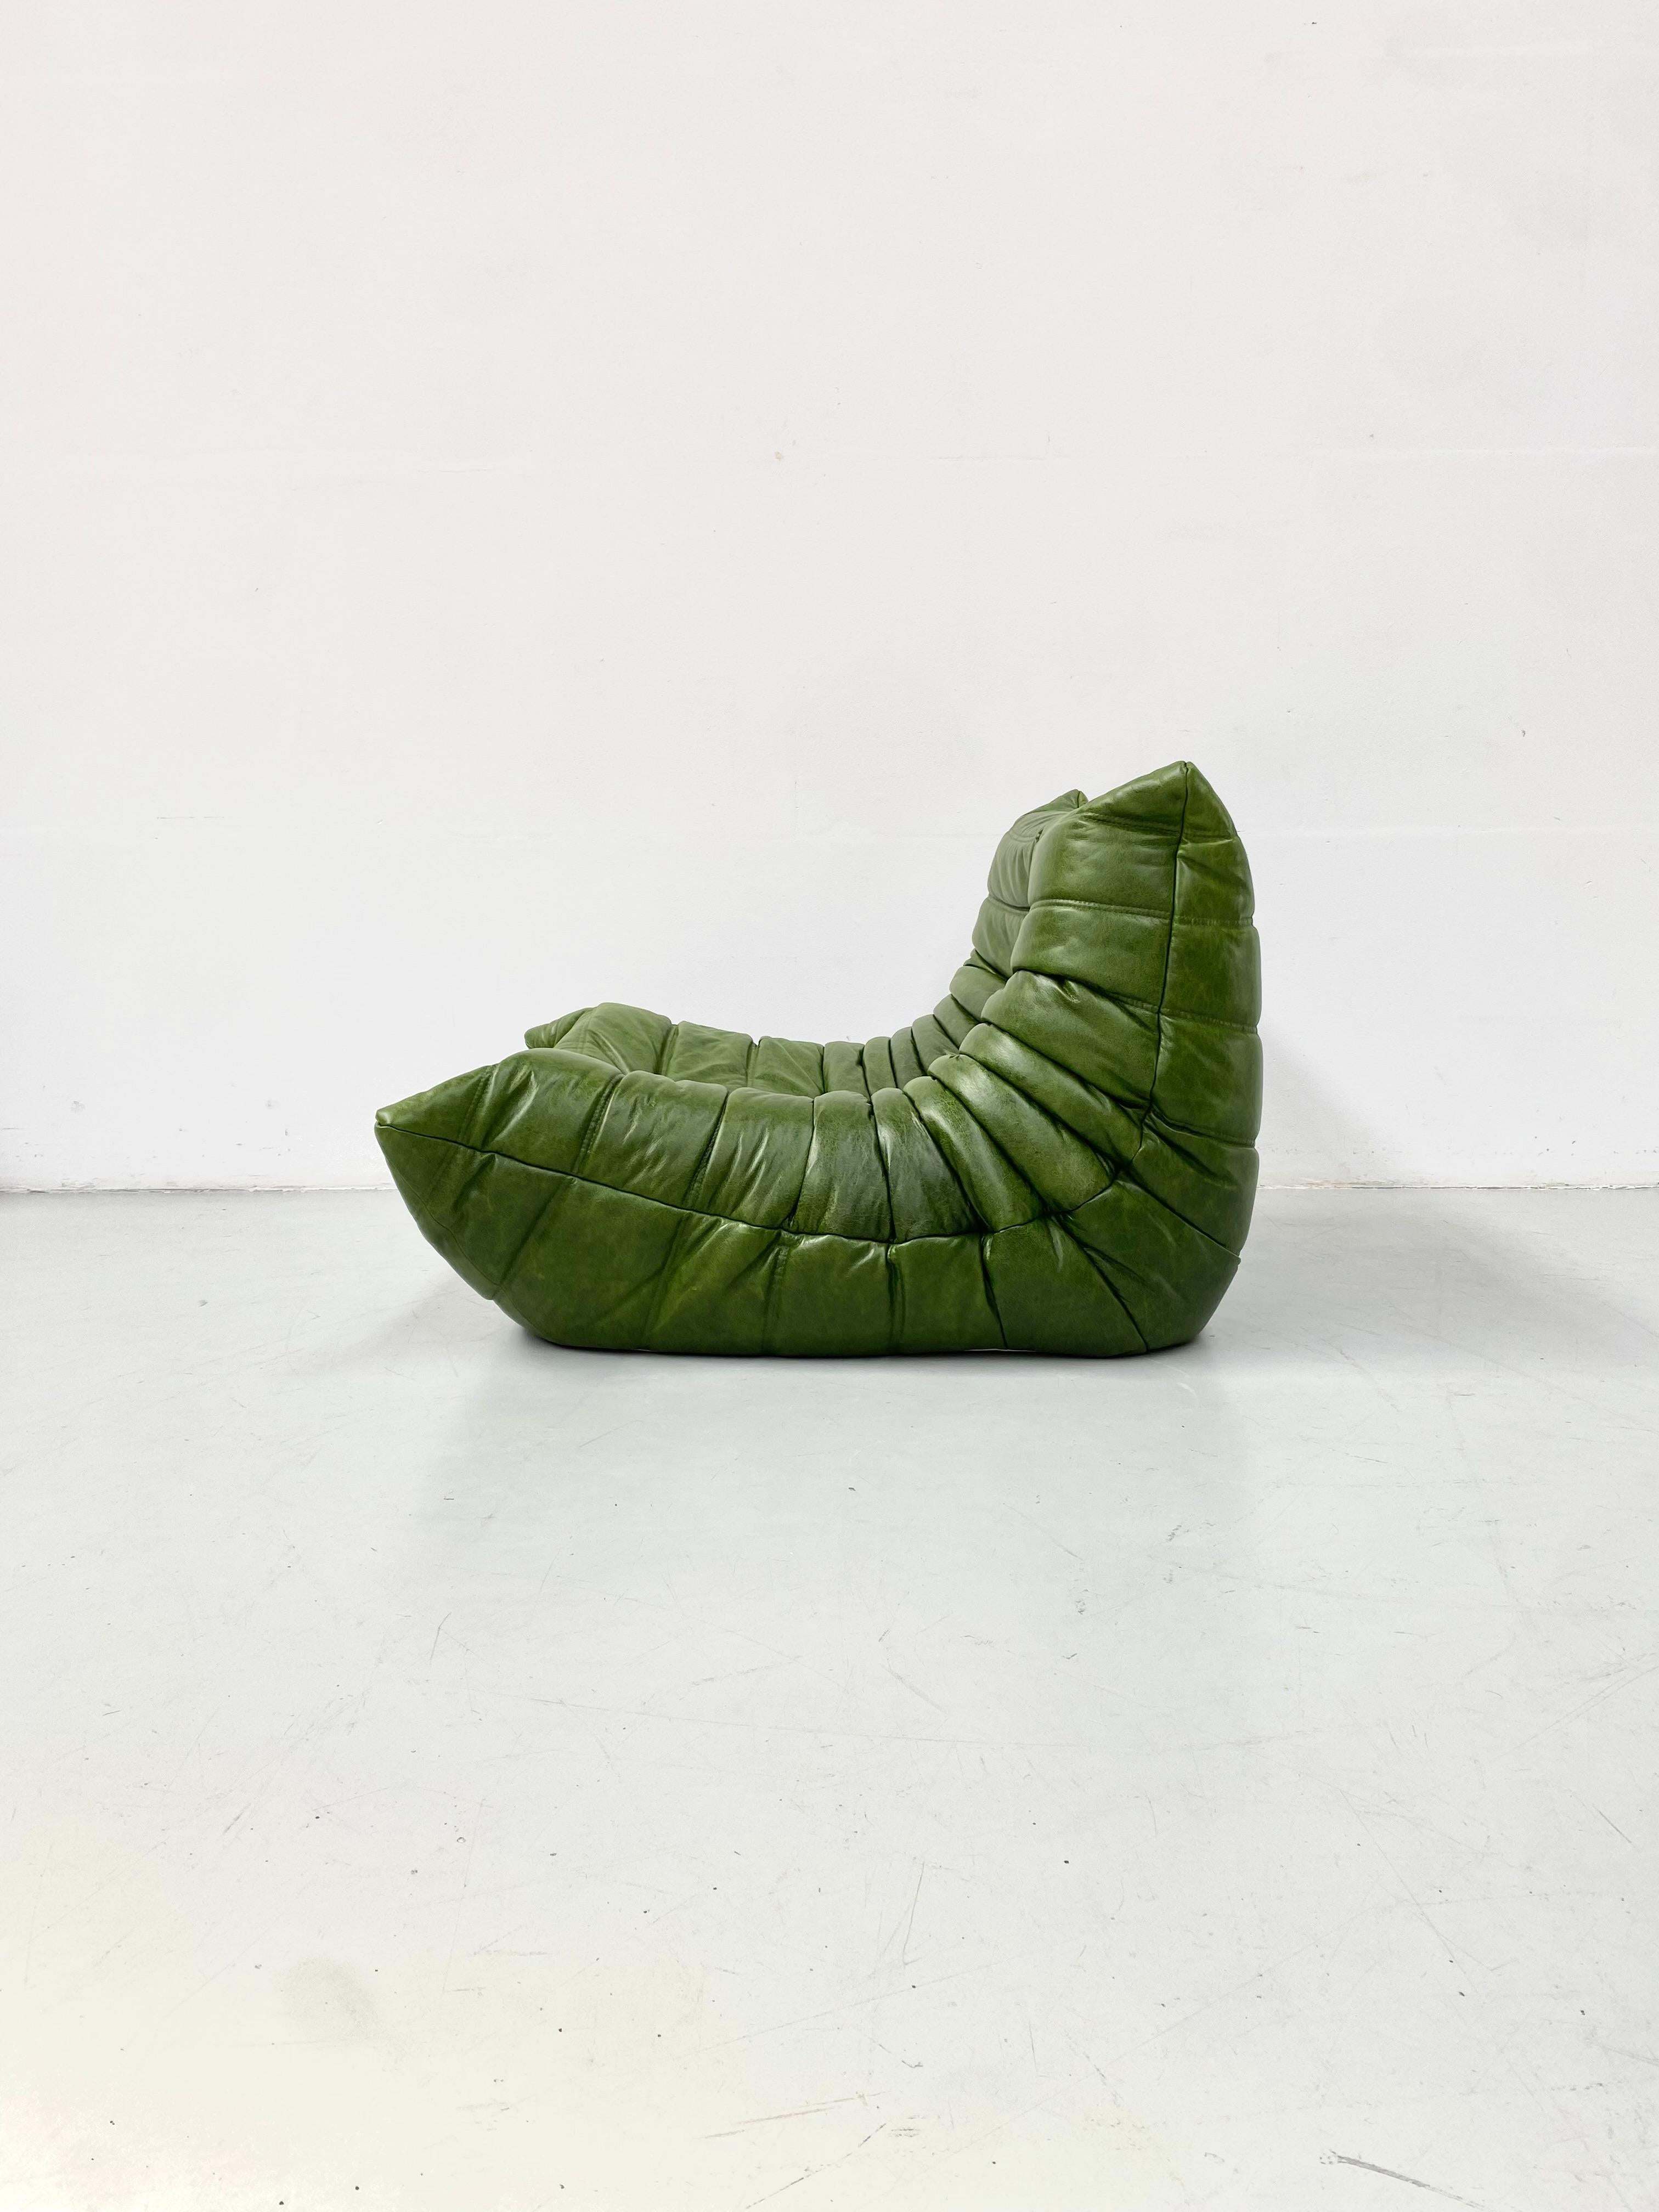 French Togo Chair in Green Leather by Michel Ducaroy for Ligne Roset, 1974. 1